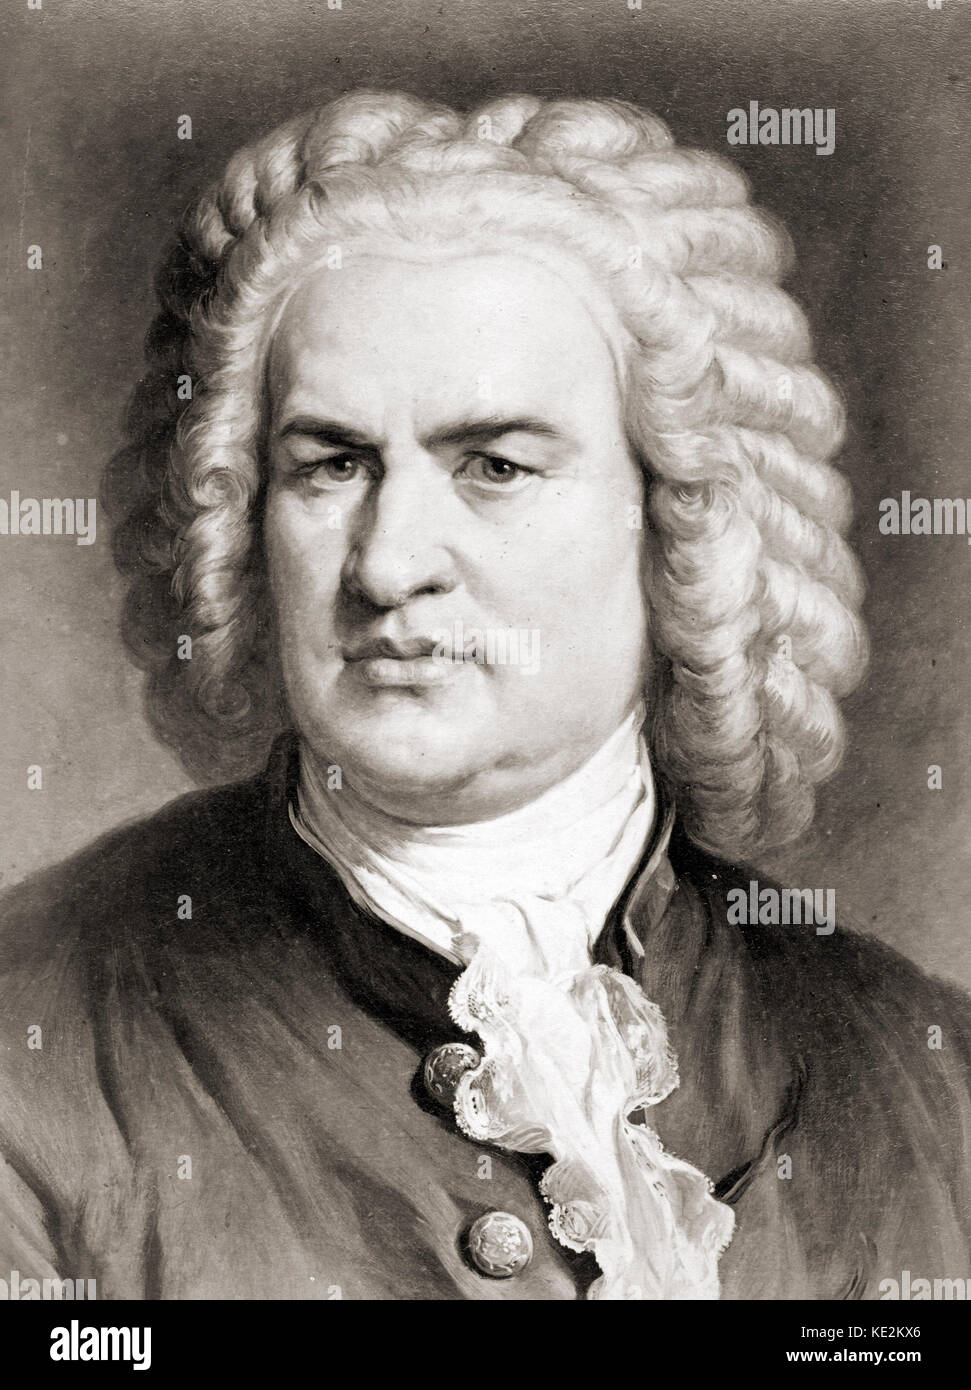 Johann Sebastian Bach - portrait of the German composer & organist by G. Jager. 21 March 1685 - 28 July 1750. Stock Photo